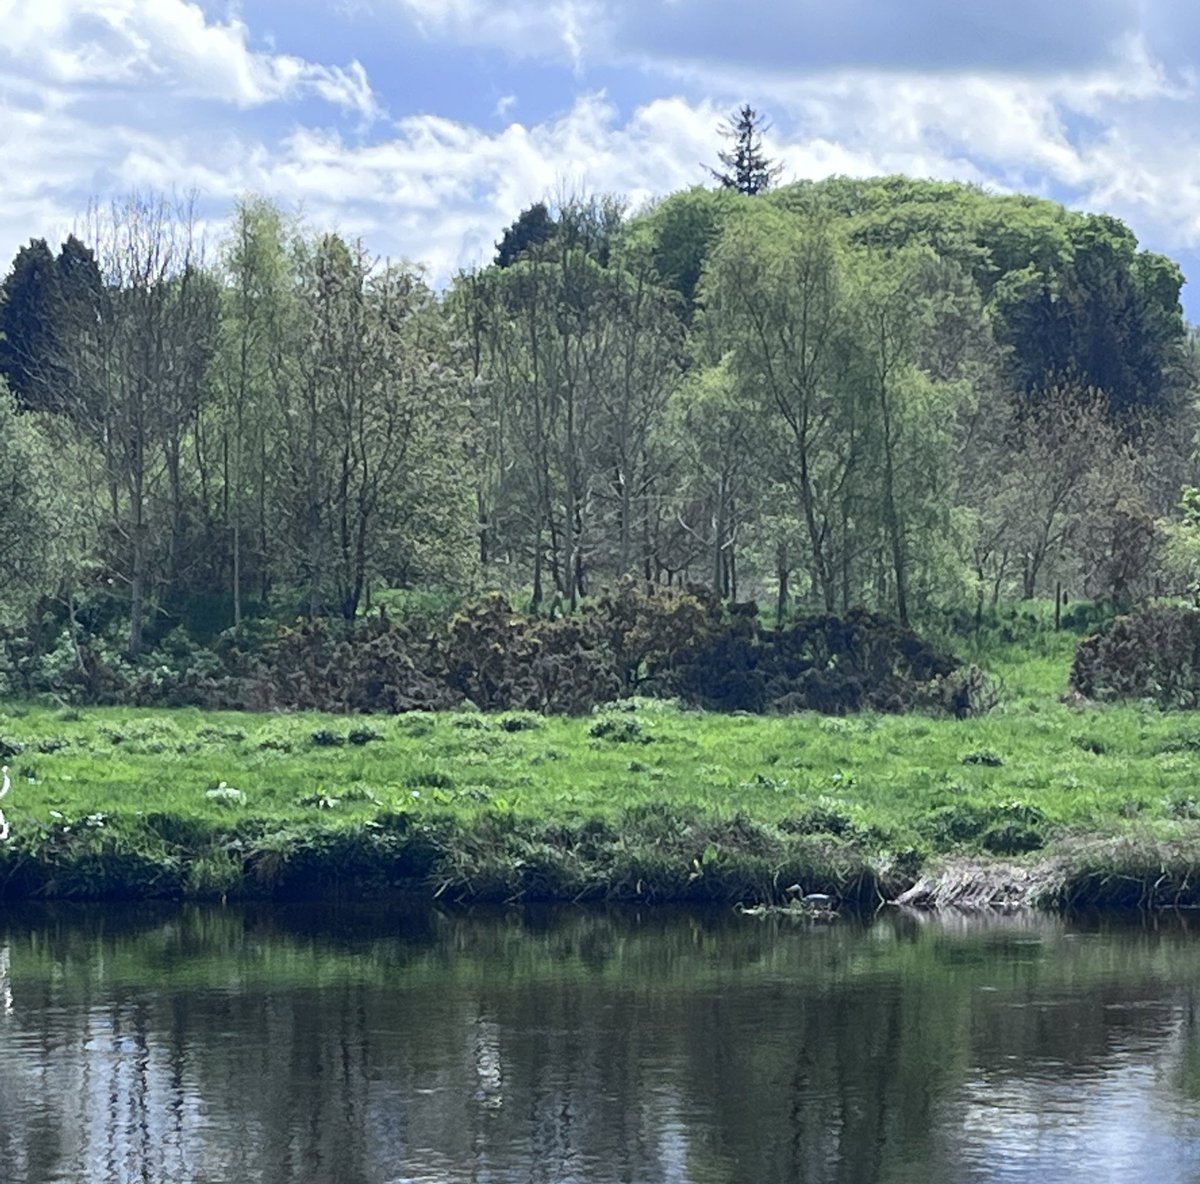 🌿Wellbeing Walk🌿

What a stunning campus we have @RobertGordonUni

A lovely short lunchtime walk with @hannahbezzy to help clear the mind🧠
Even spotted a wee heron fishing! 🎣

Who’s joining me next time? 

@RGUNMandP @RGUParamedics @MidwivesRGU 
#Wellbeing #Wenurseacademics